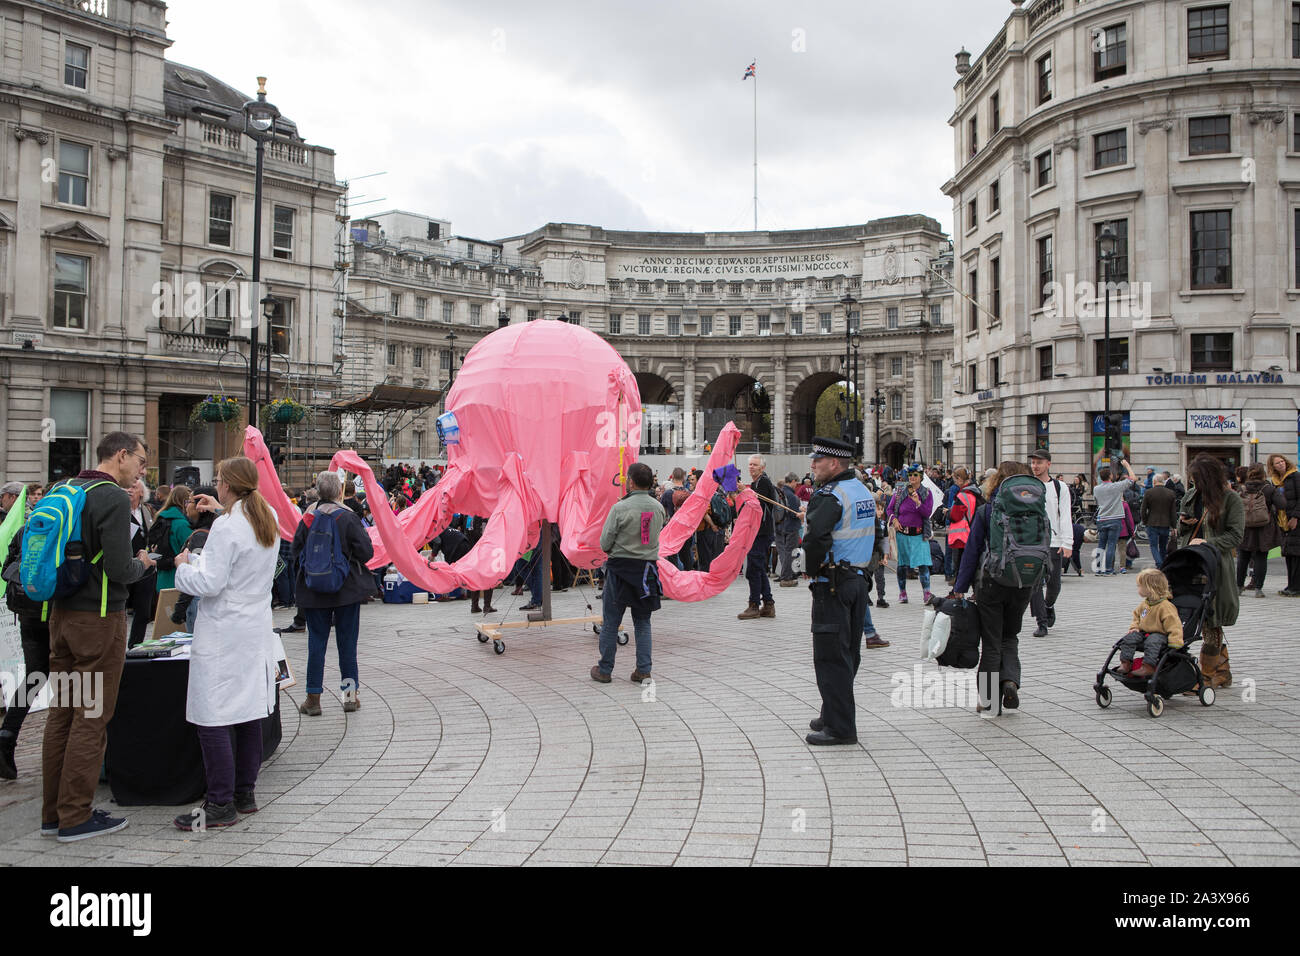 Westminster, London, UK. 10 October 2019. Environmental campaigners Extinction Rebellion have started two weeks protests from 7th to 20th October in and around London to demonstrate against climate change. The protesters in Trafalgar Square demand decisive action from the UK Government on the global environmental crisis. The controversial pink Octopus is moved around in the square. Stock Photo